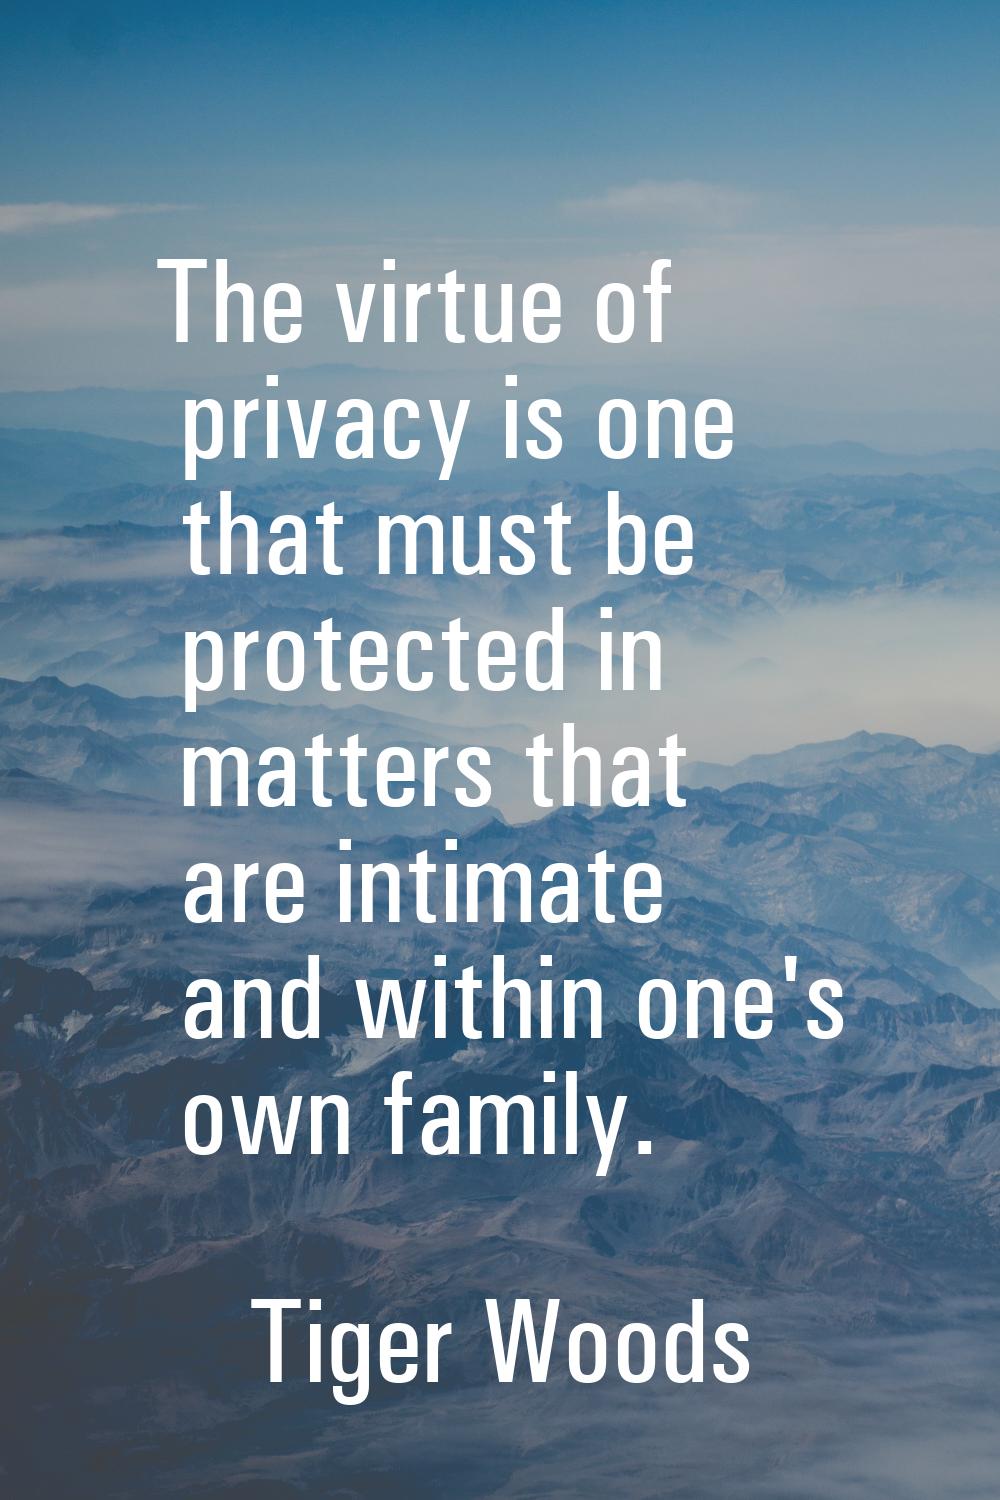 The virtue of privacy is one that must be protected in matters that are intimate and within one's o